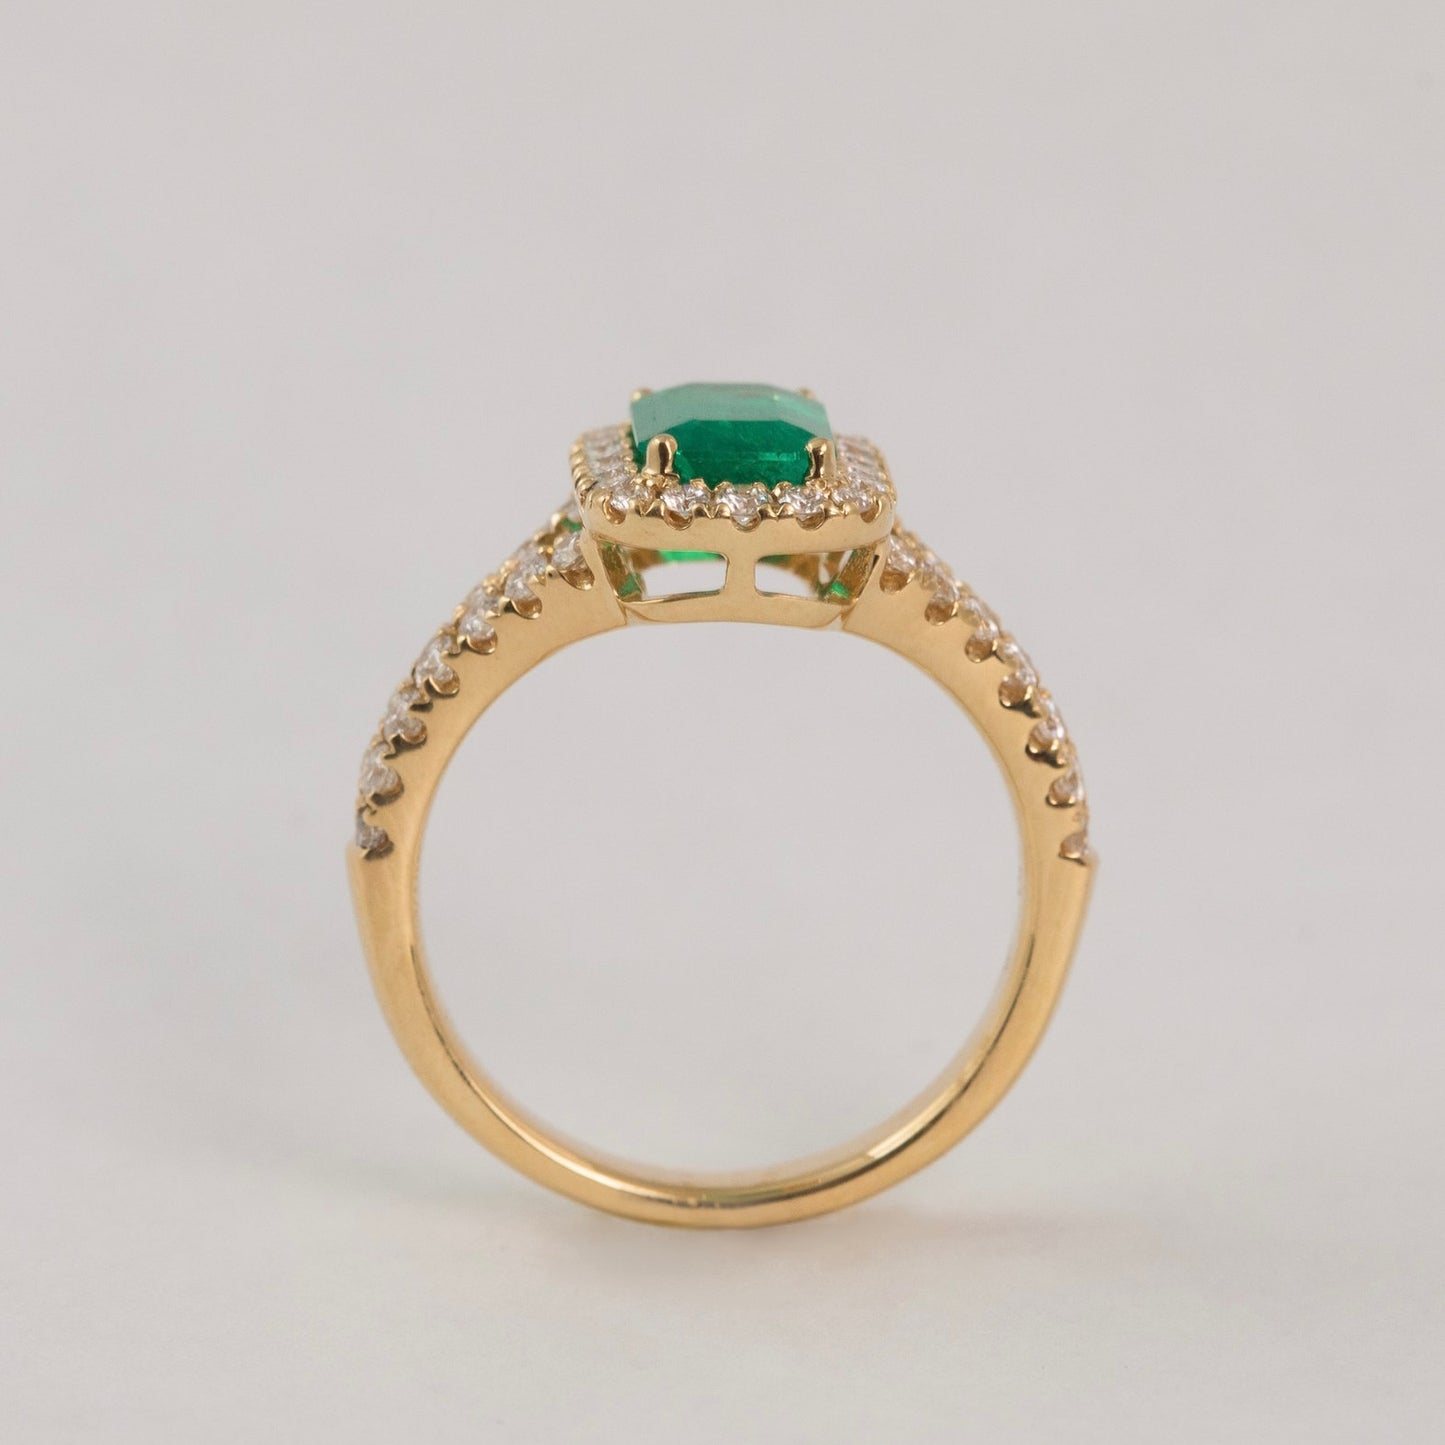 The Angel's Cry Emerald Ring